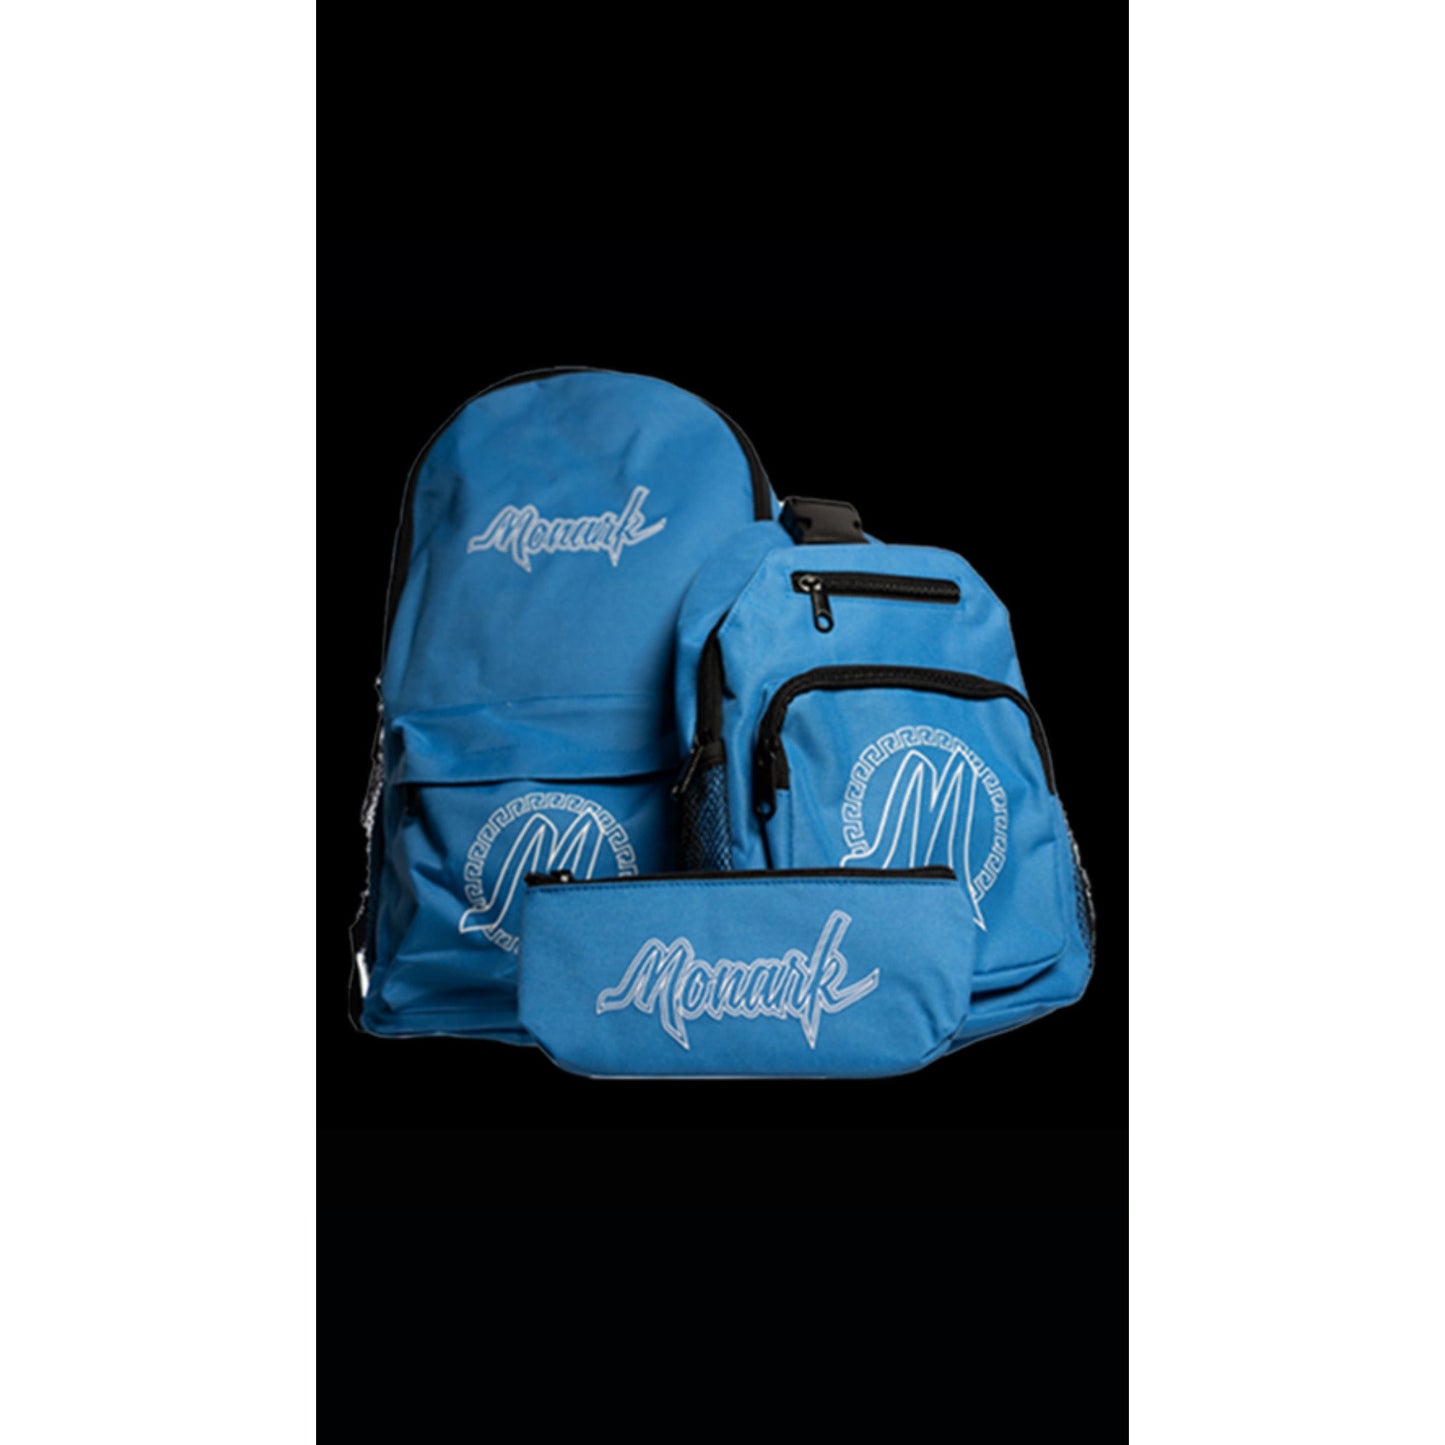 Monark Backpack, Sling bag and padded pipe pouch Set